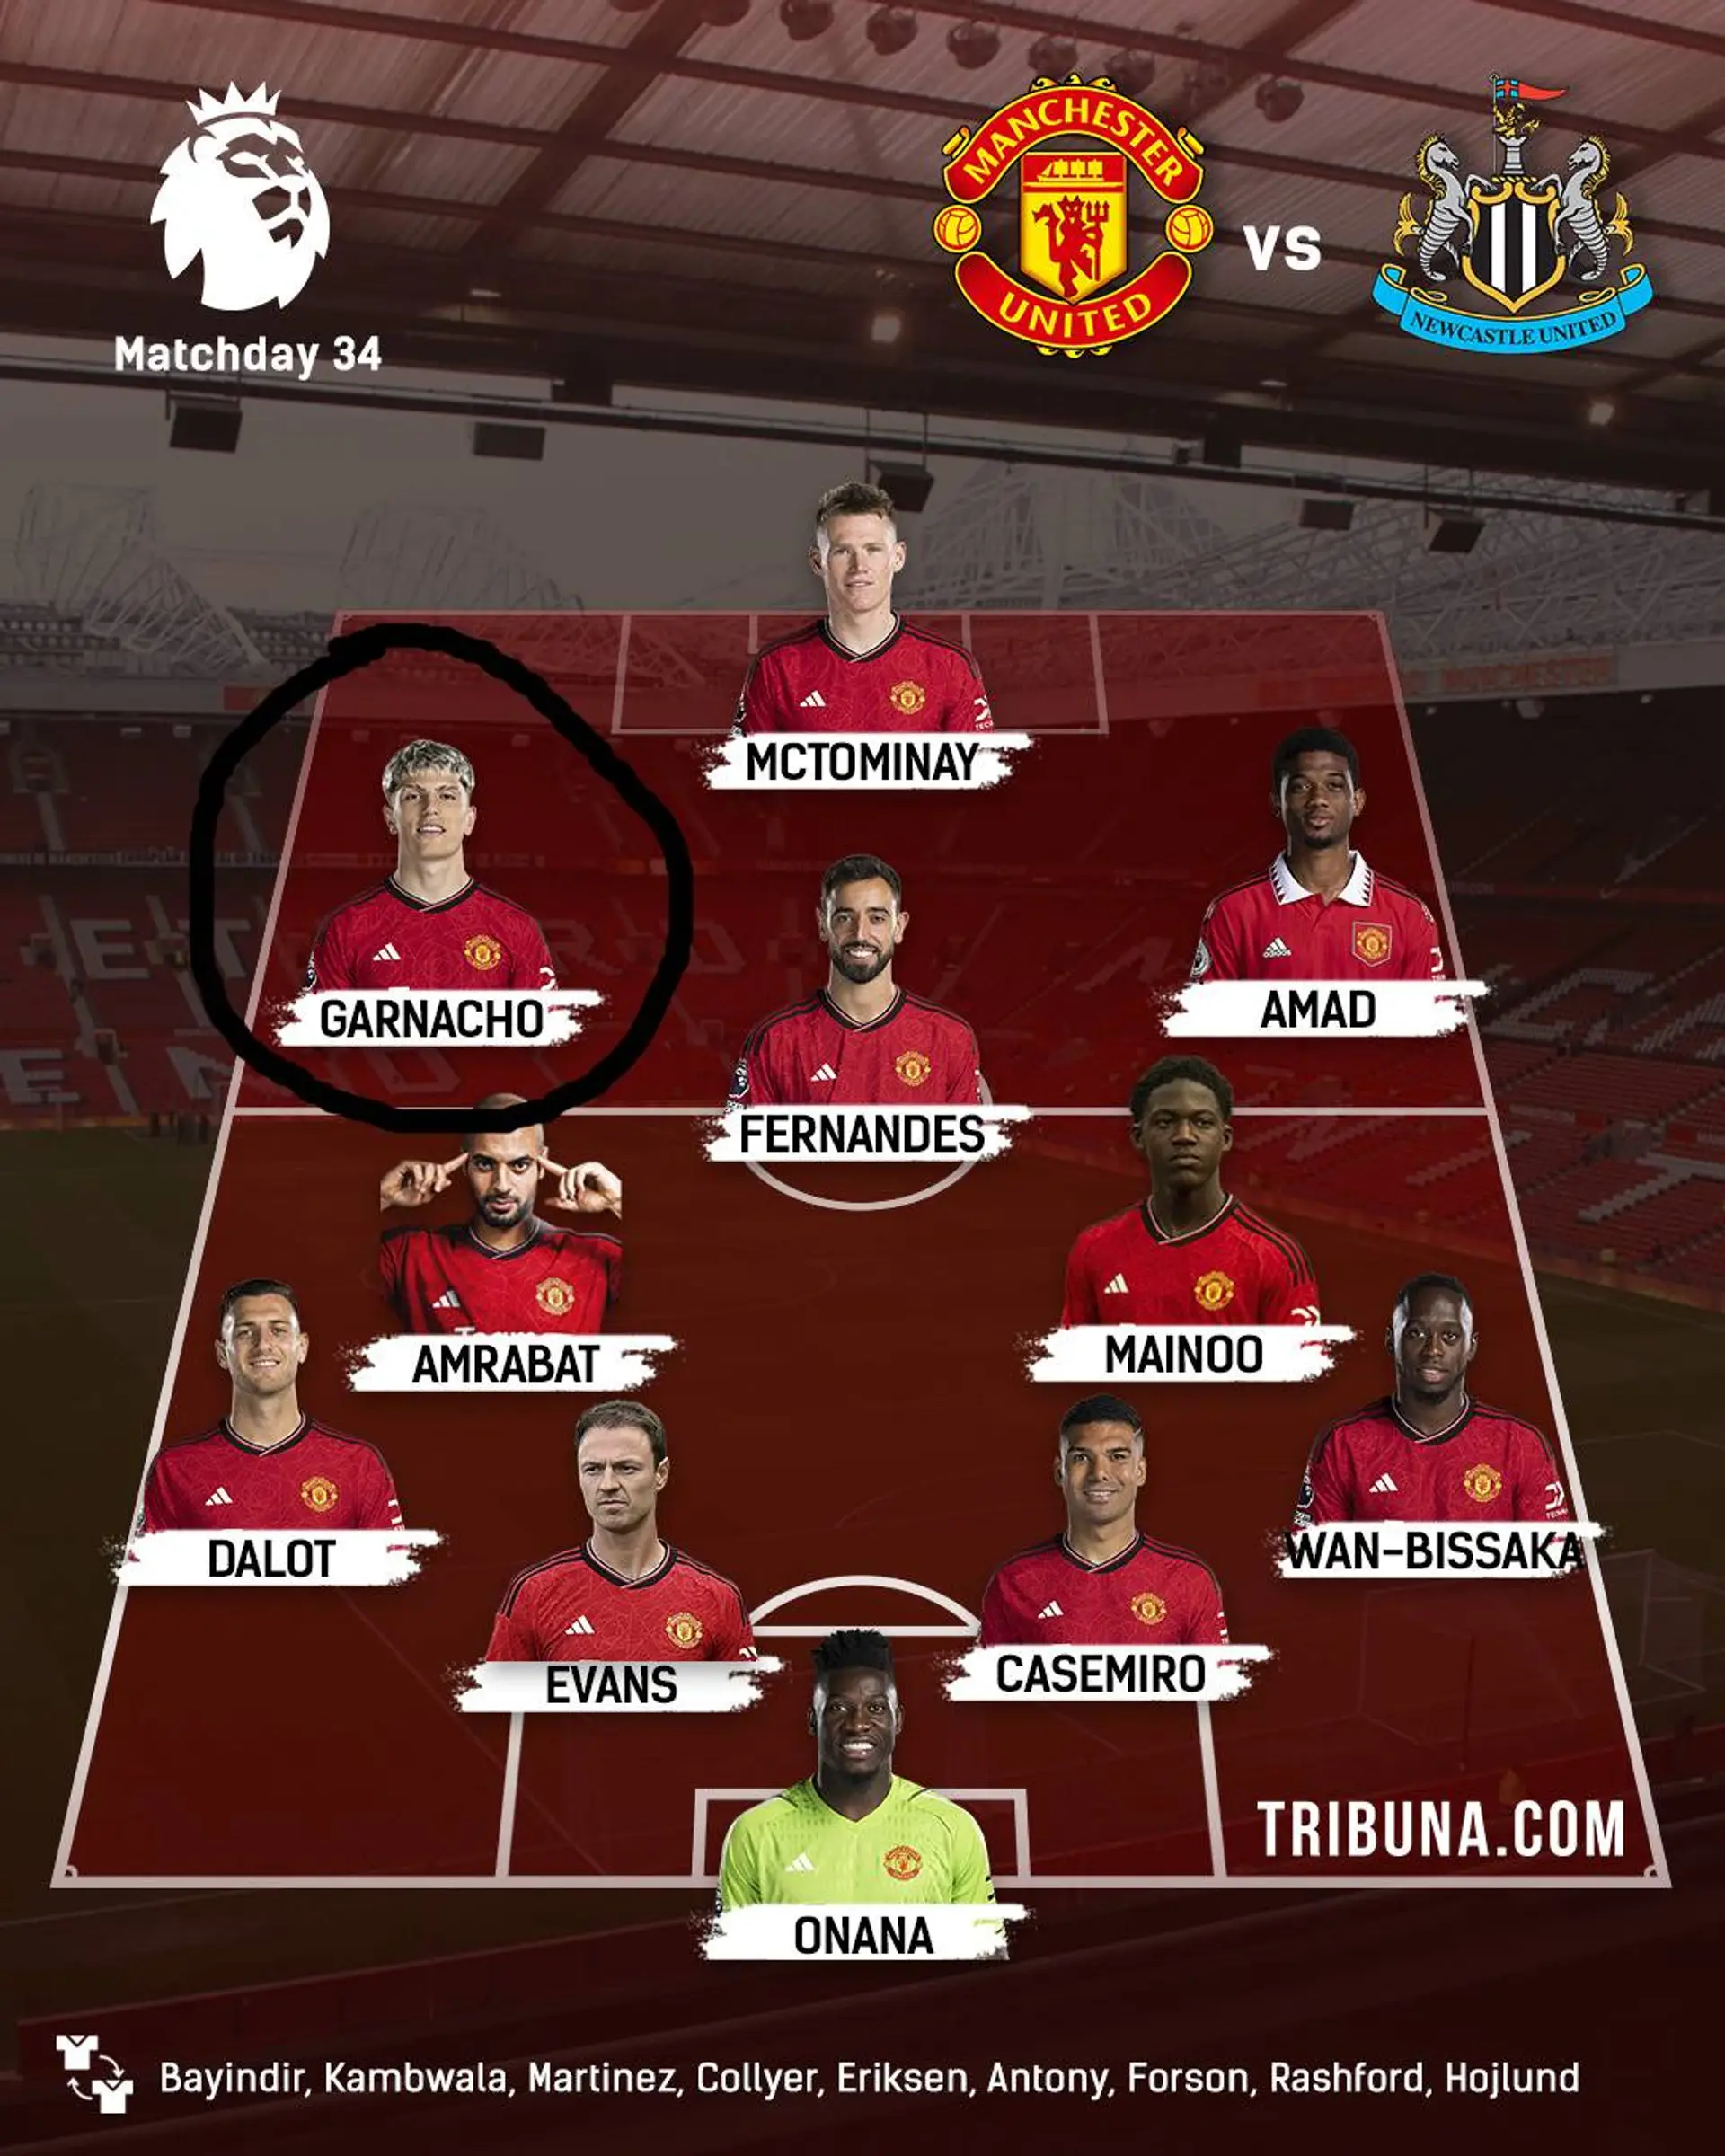 One major weakness in Man United's win over Newcastle shown in line-up